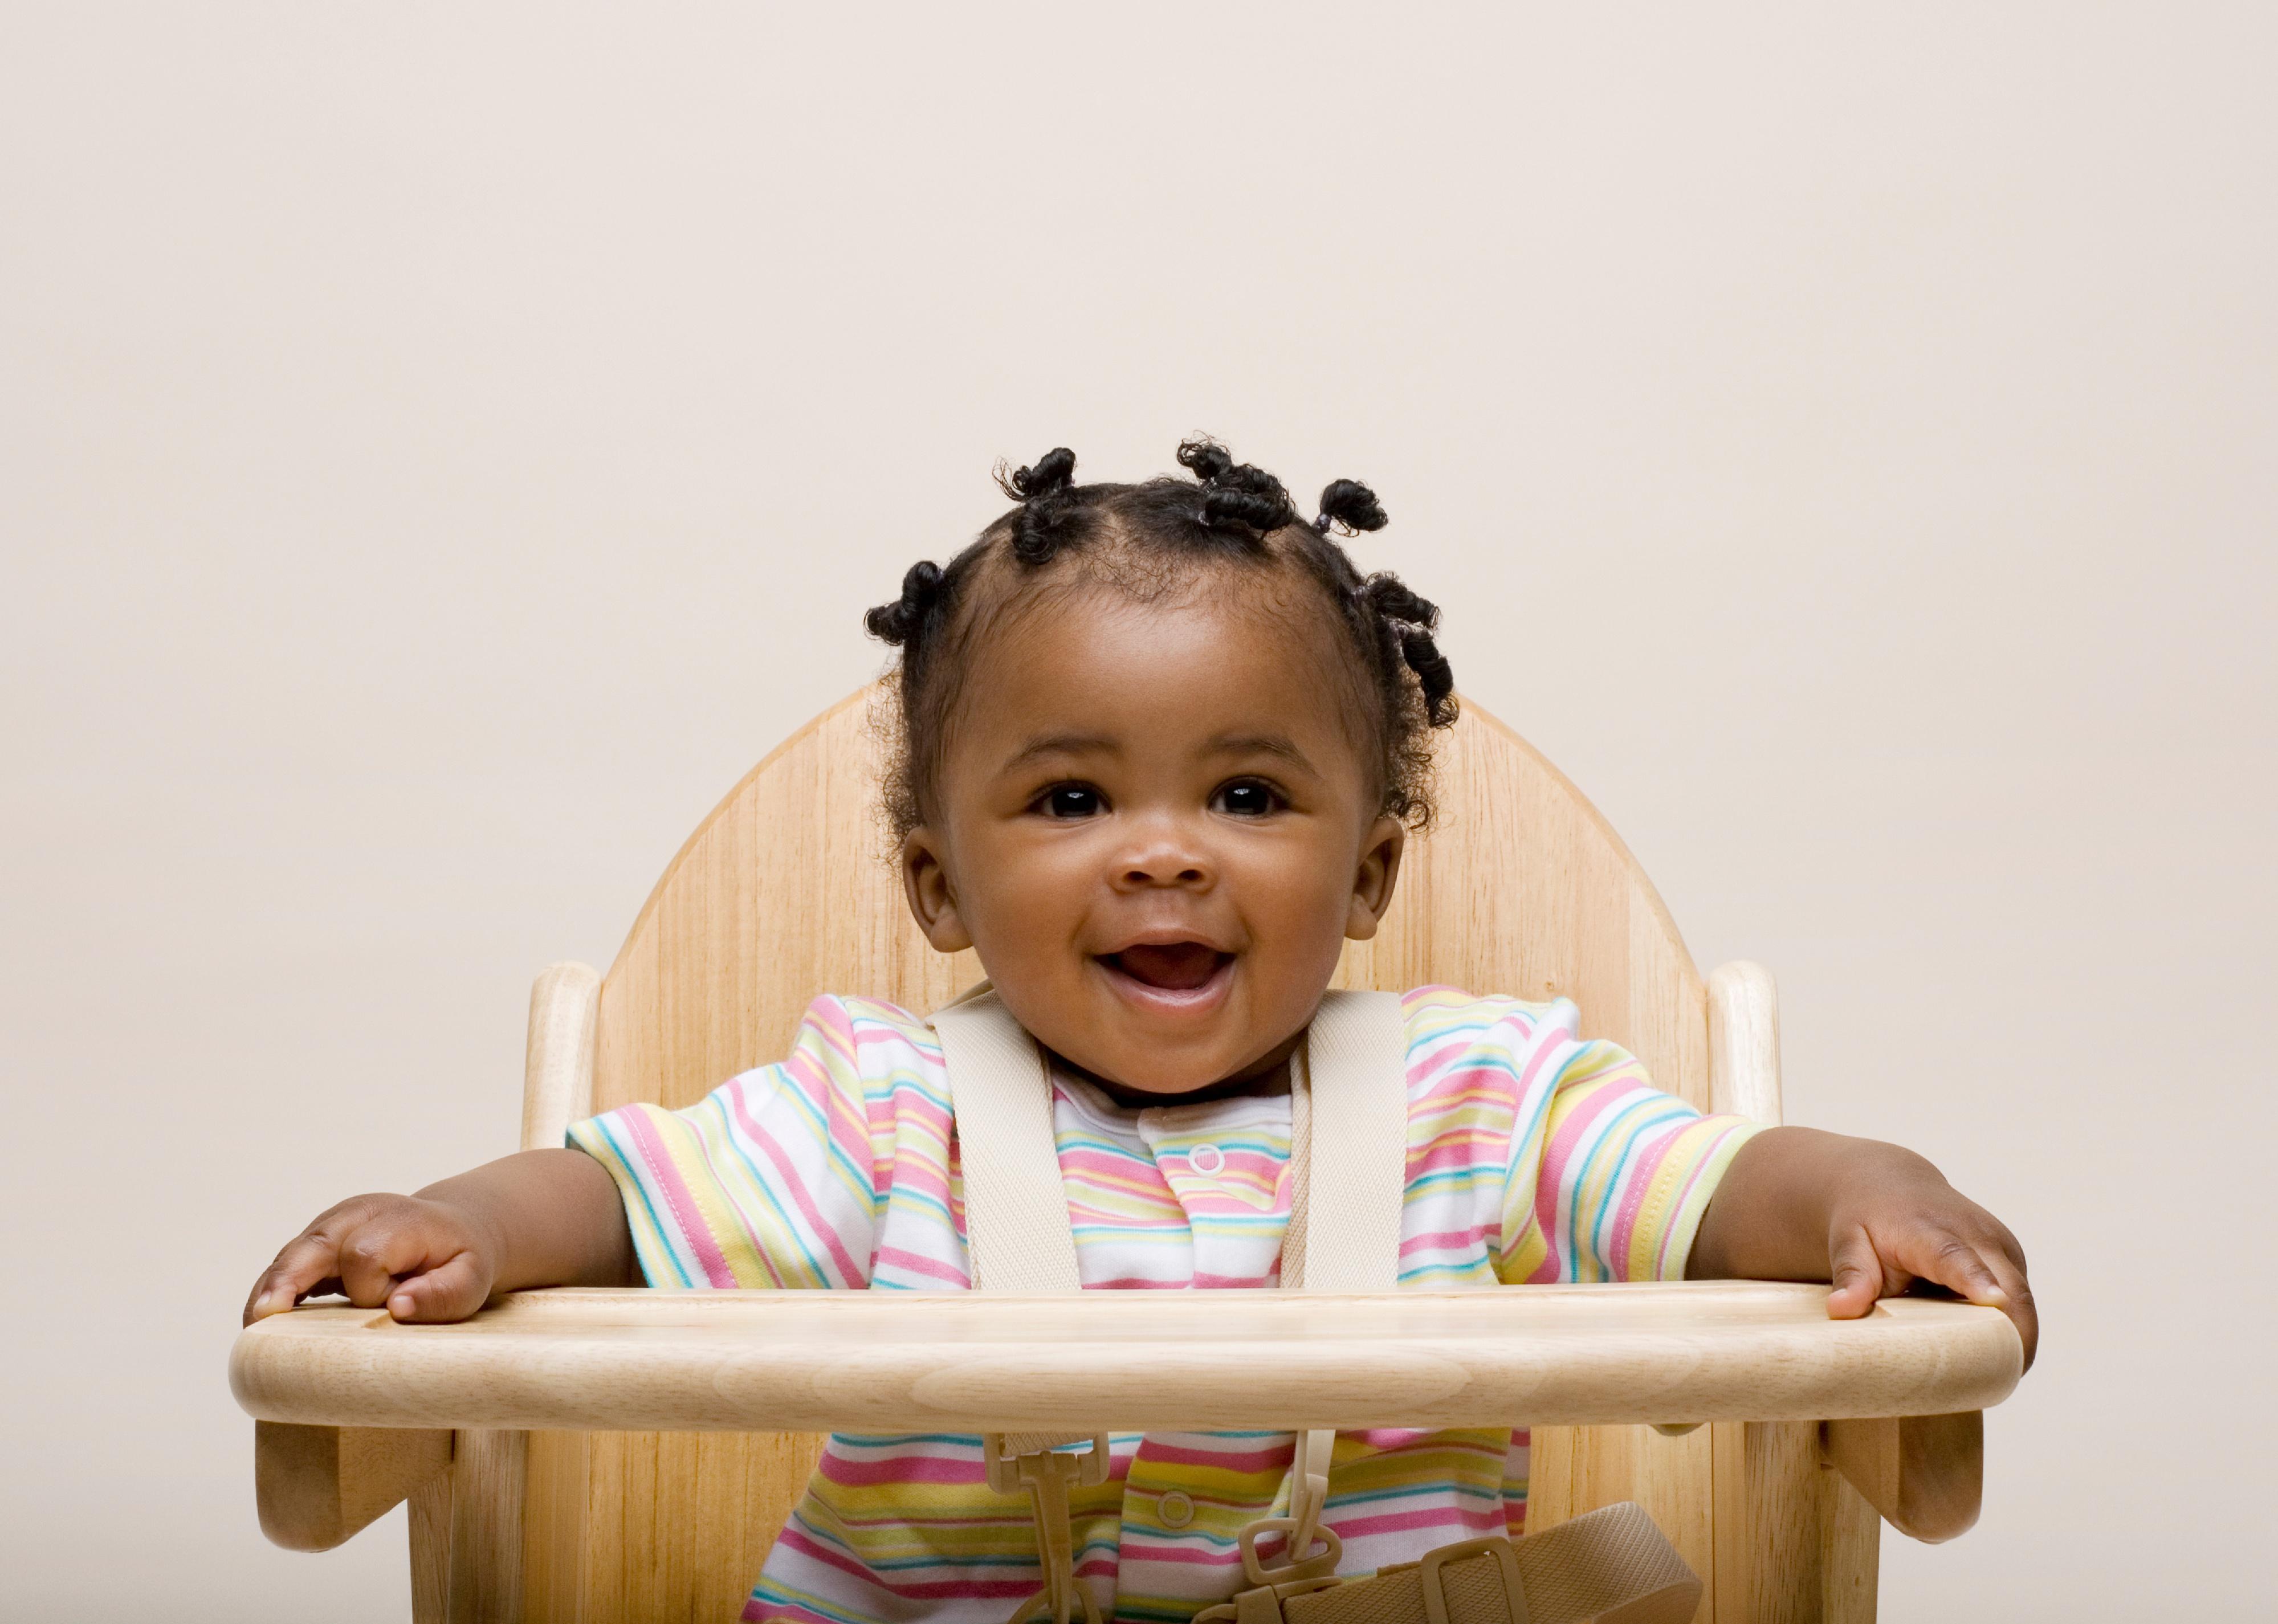 Baby girl in high chair smiling.